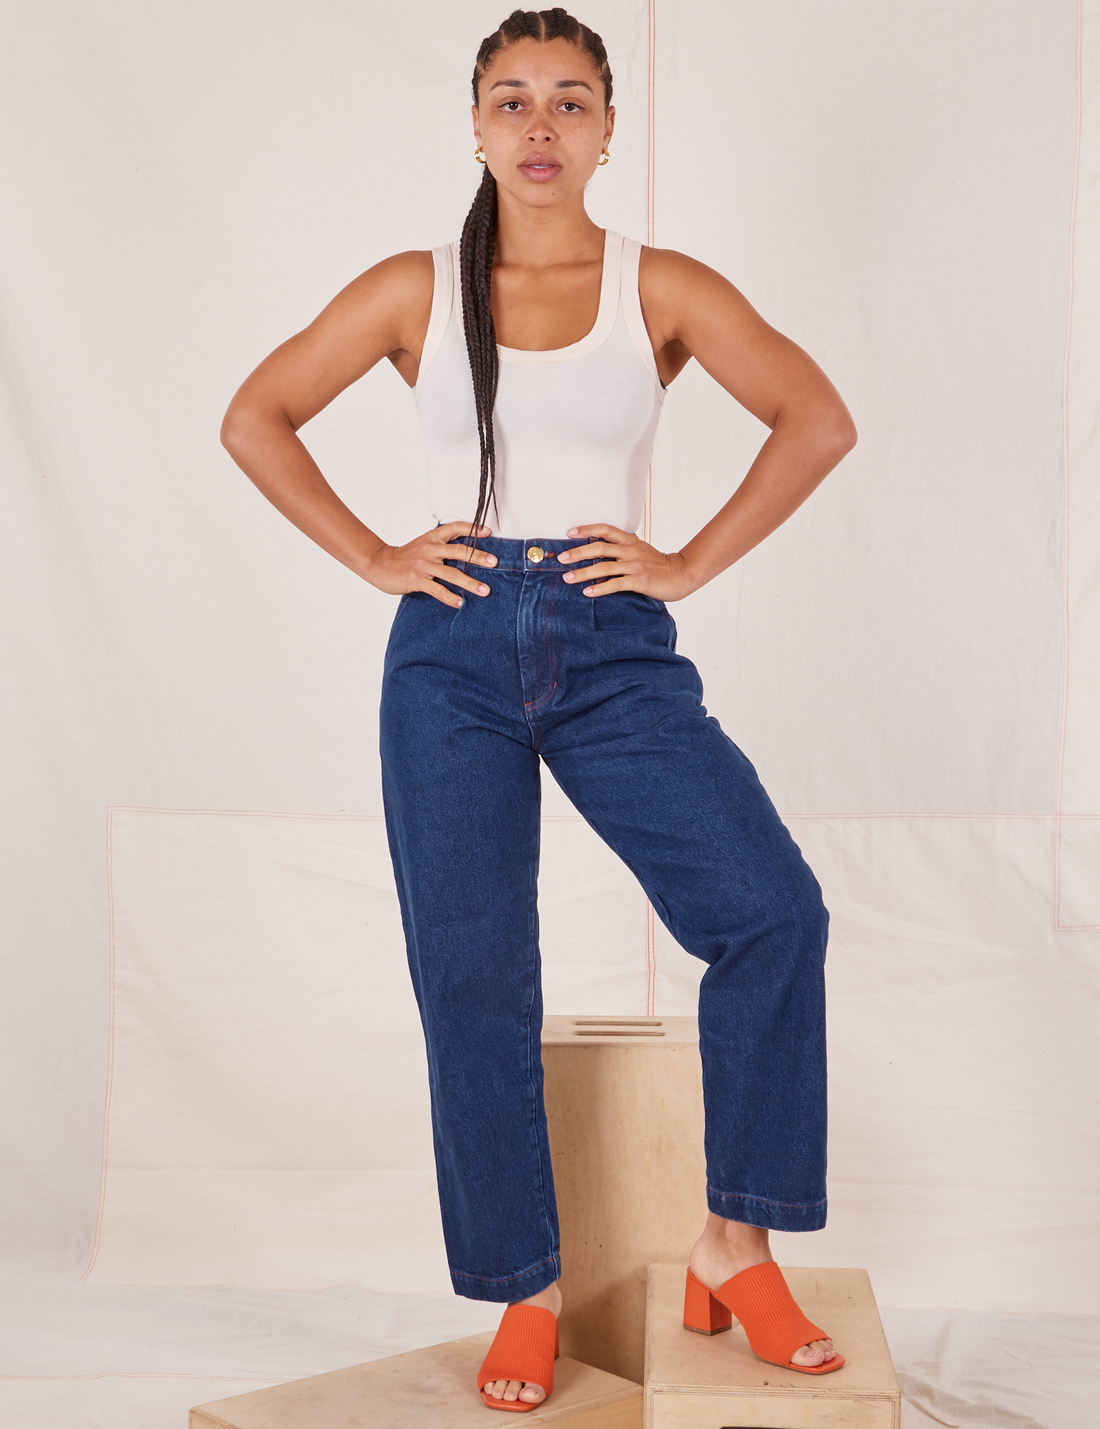 Gabi is 5'7" and wearing XXS Denim Trouser Jeans in Dark Wash paired with vintage off-white Tank Top